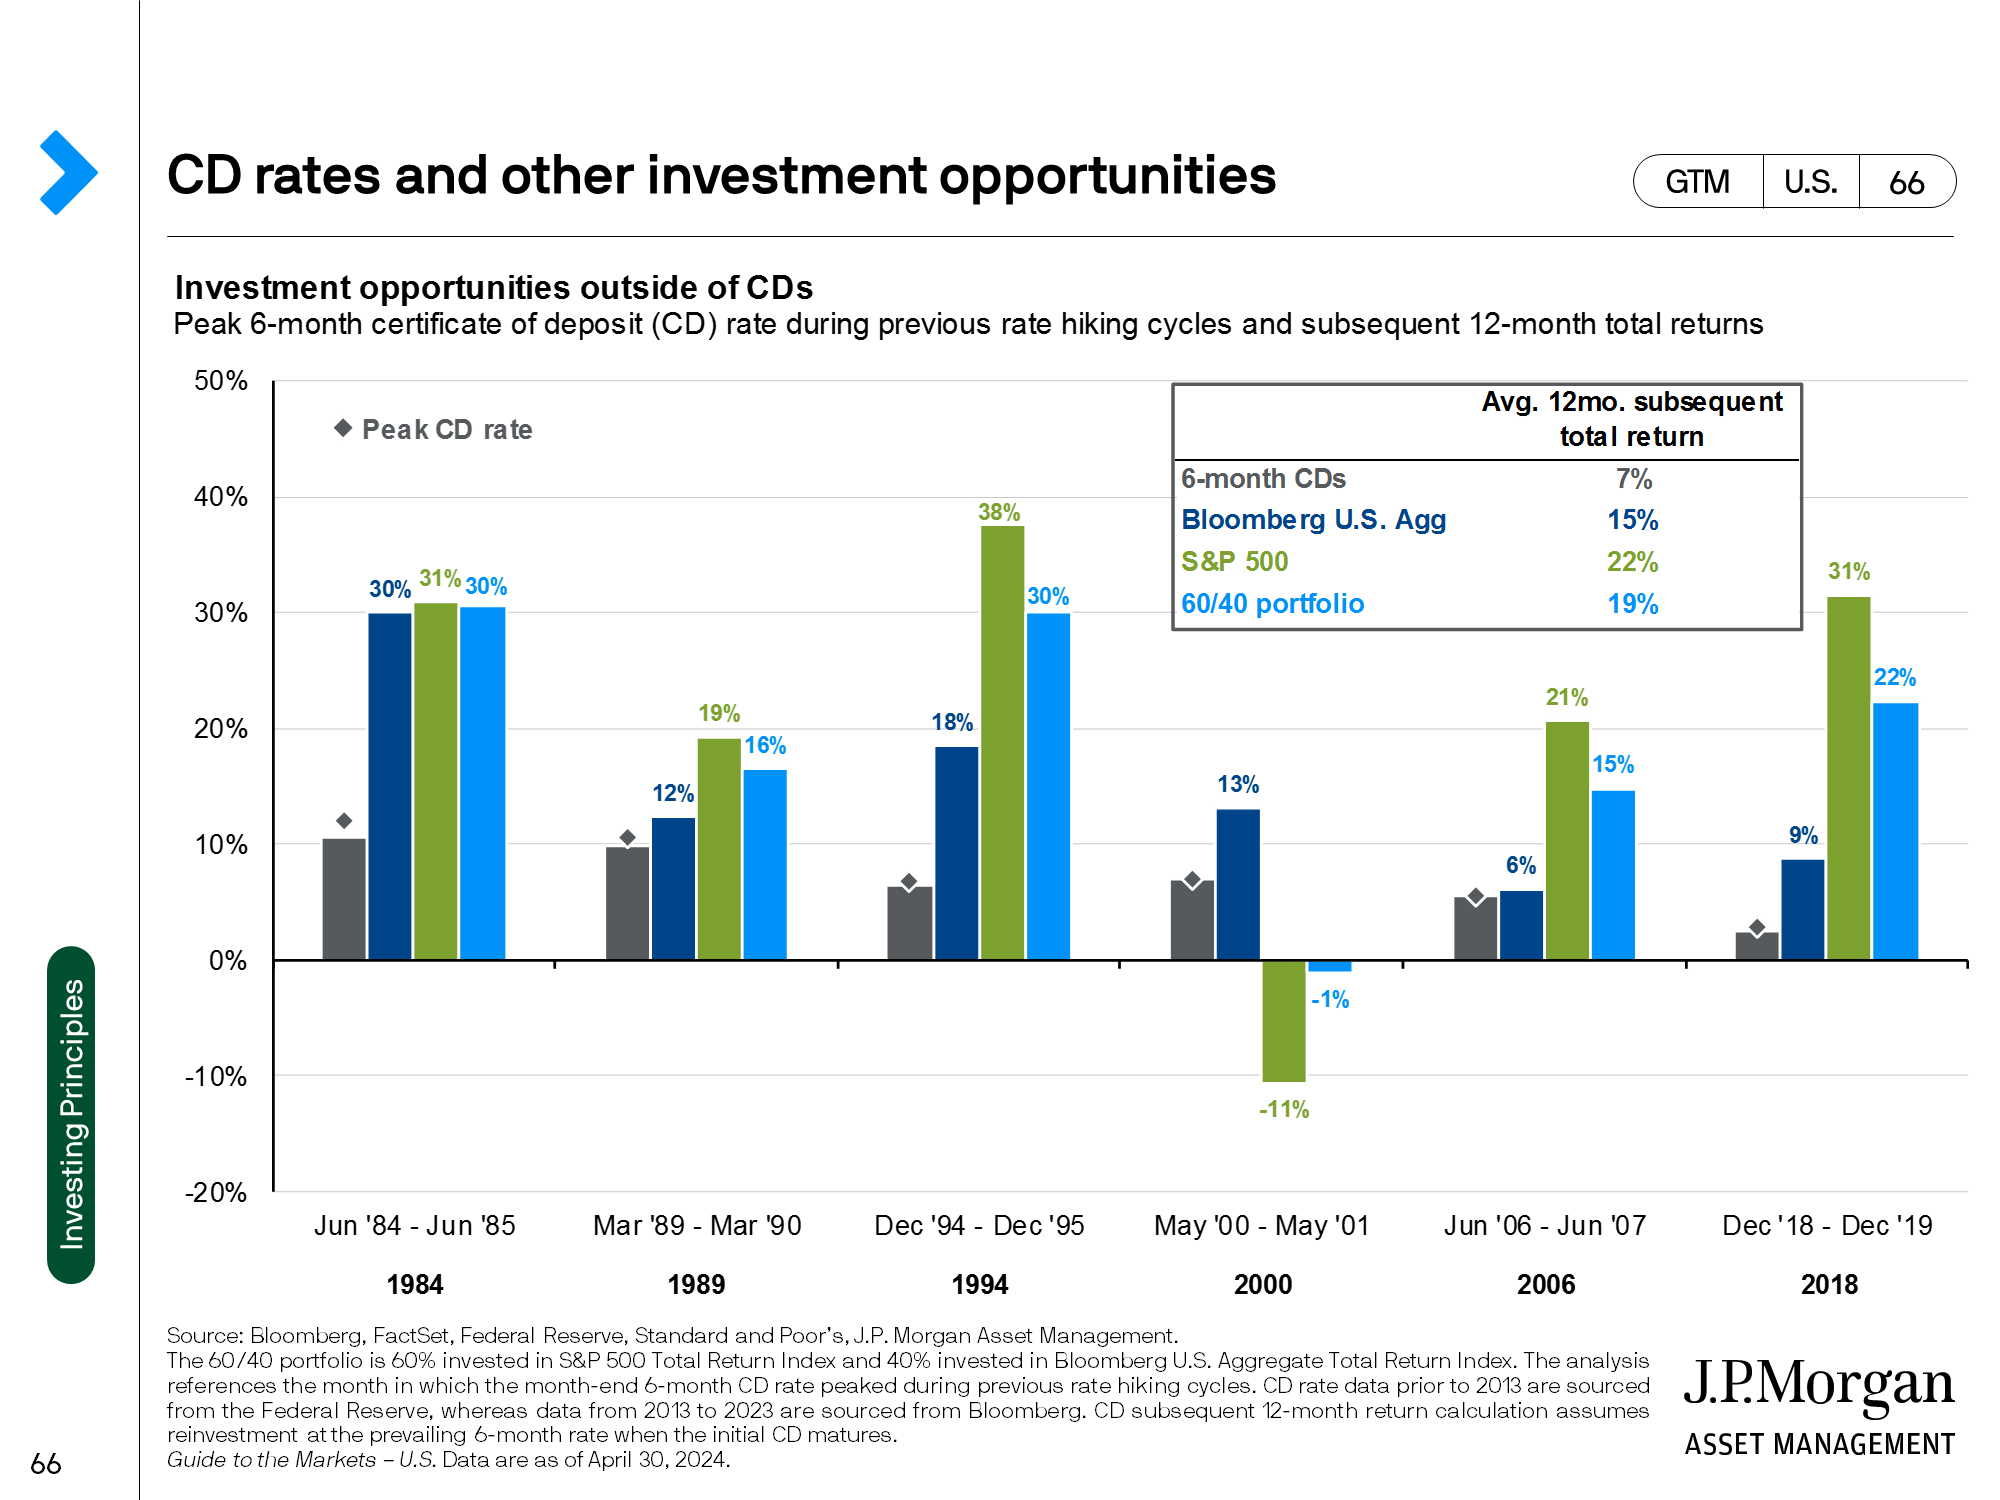 CD rates and fixed income opportunities